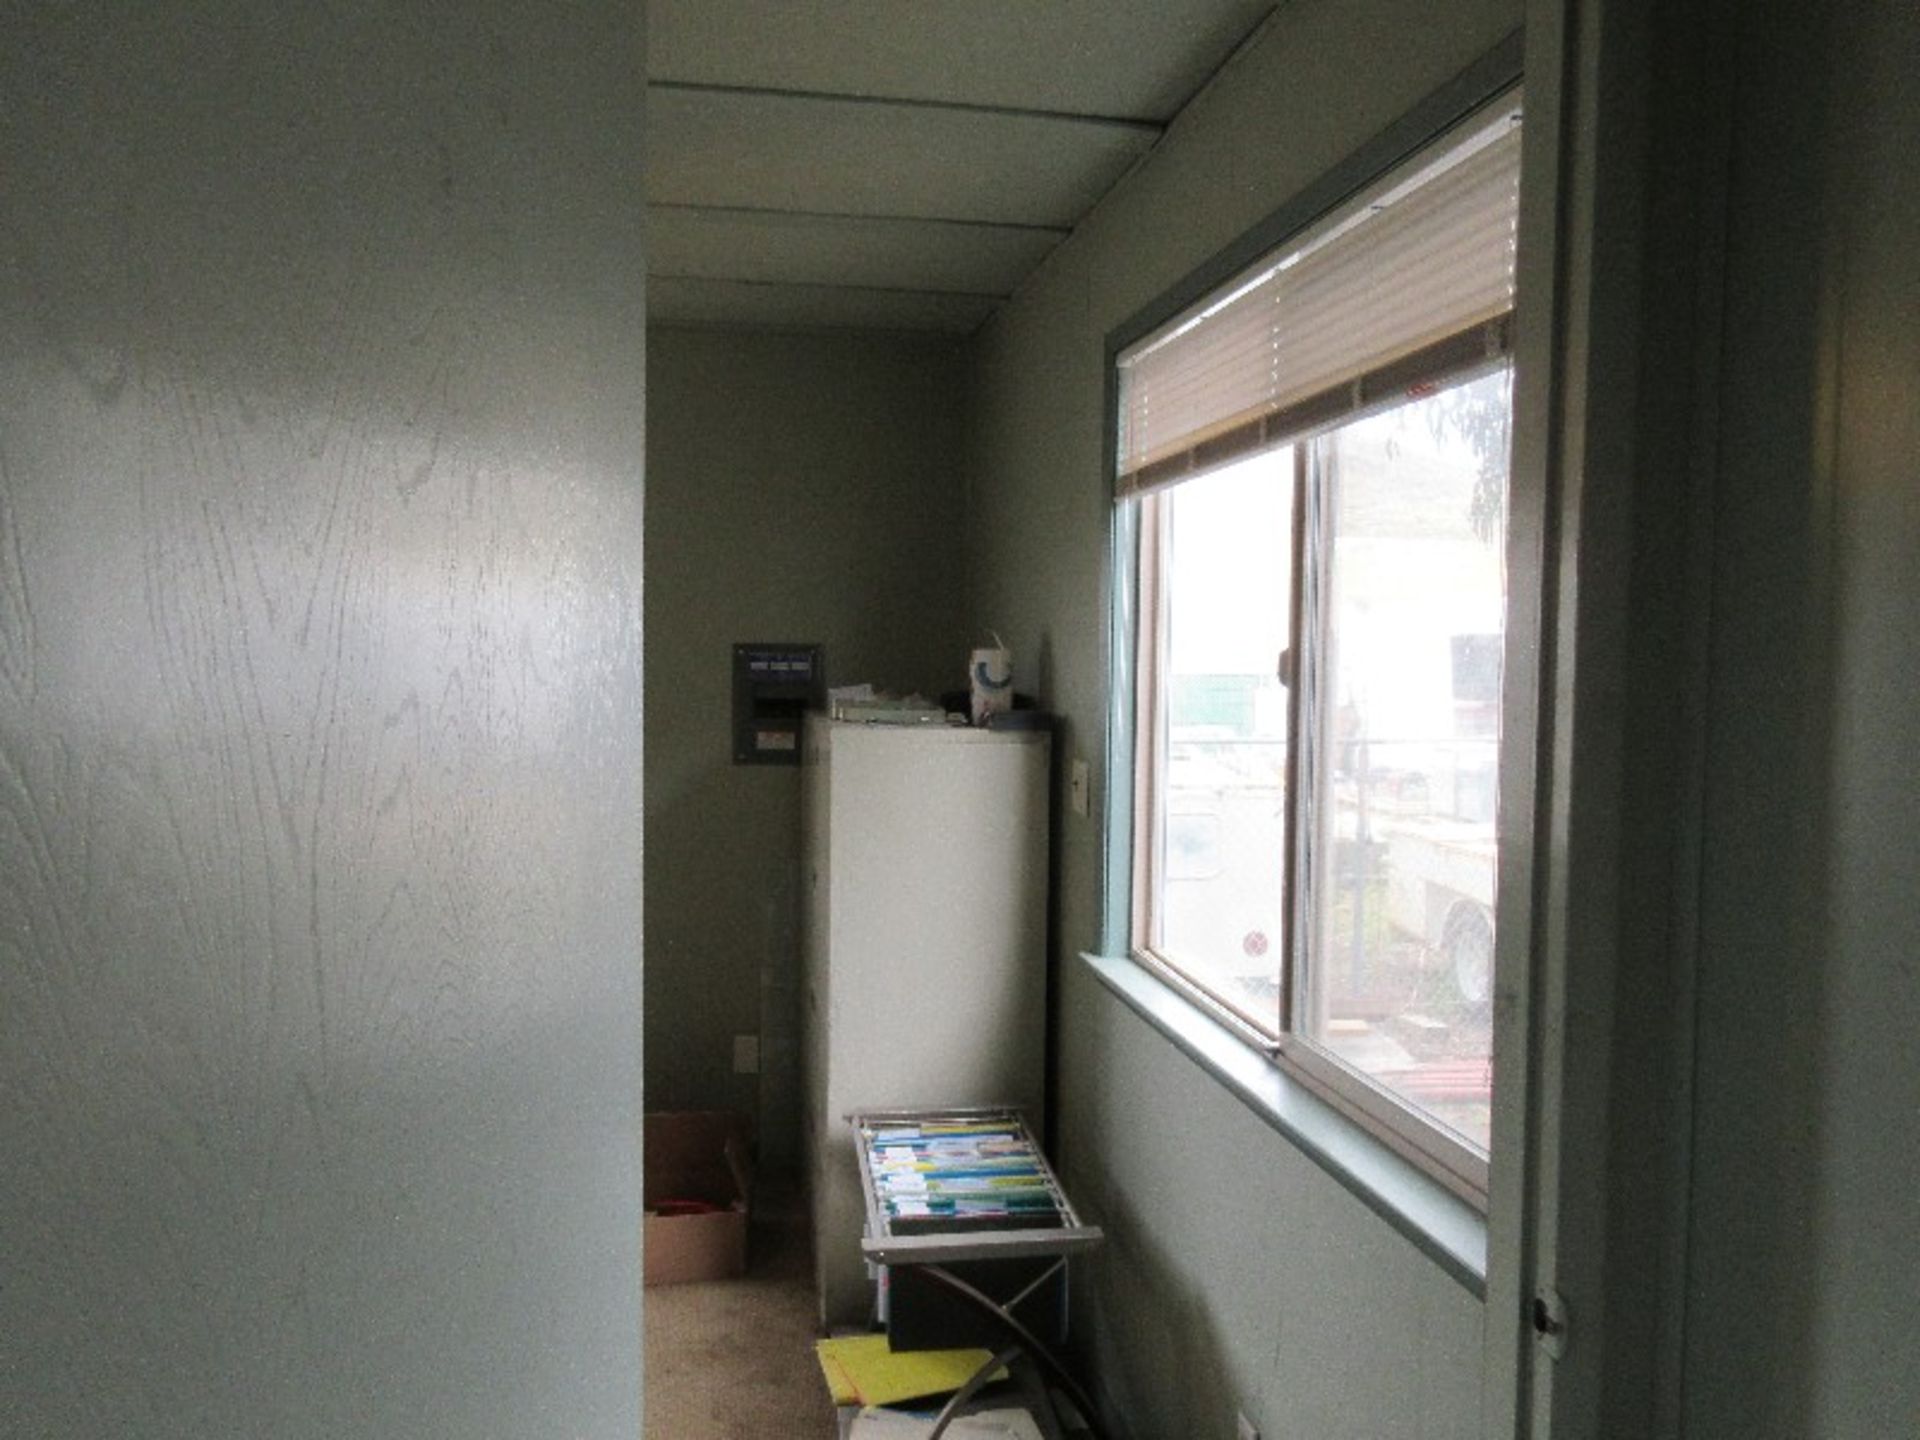 Office Trailer - Image 4 of 4